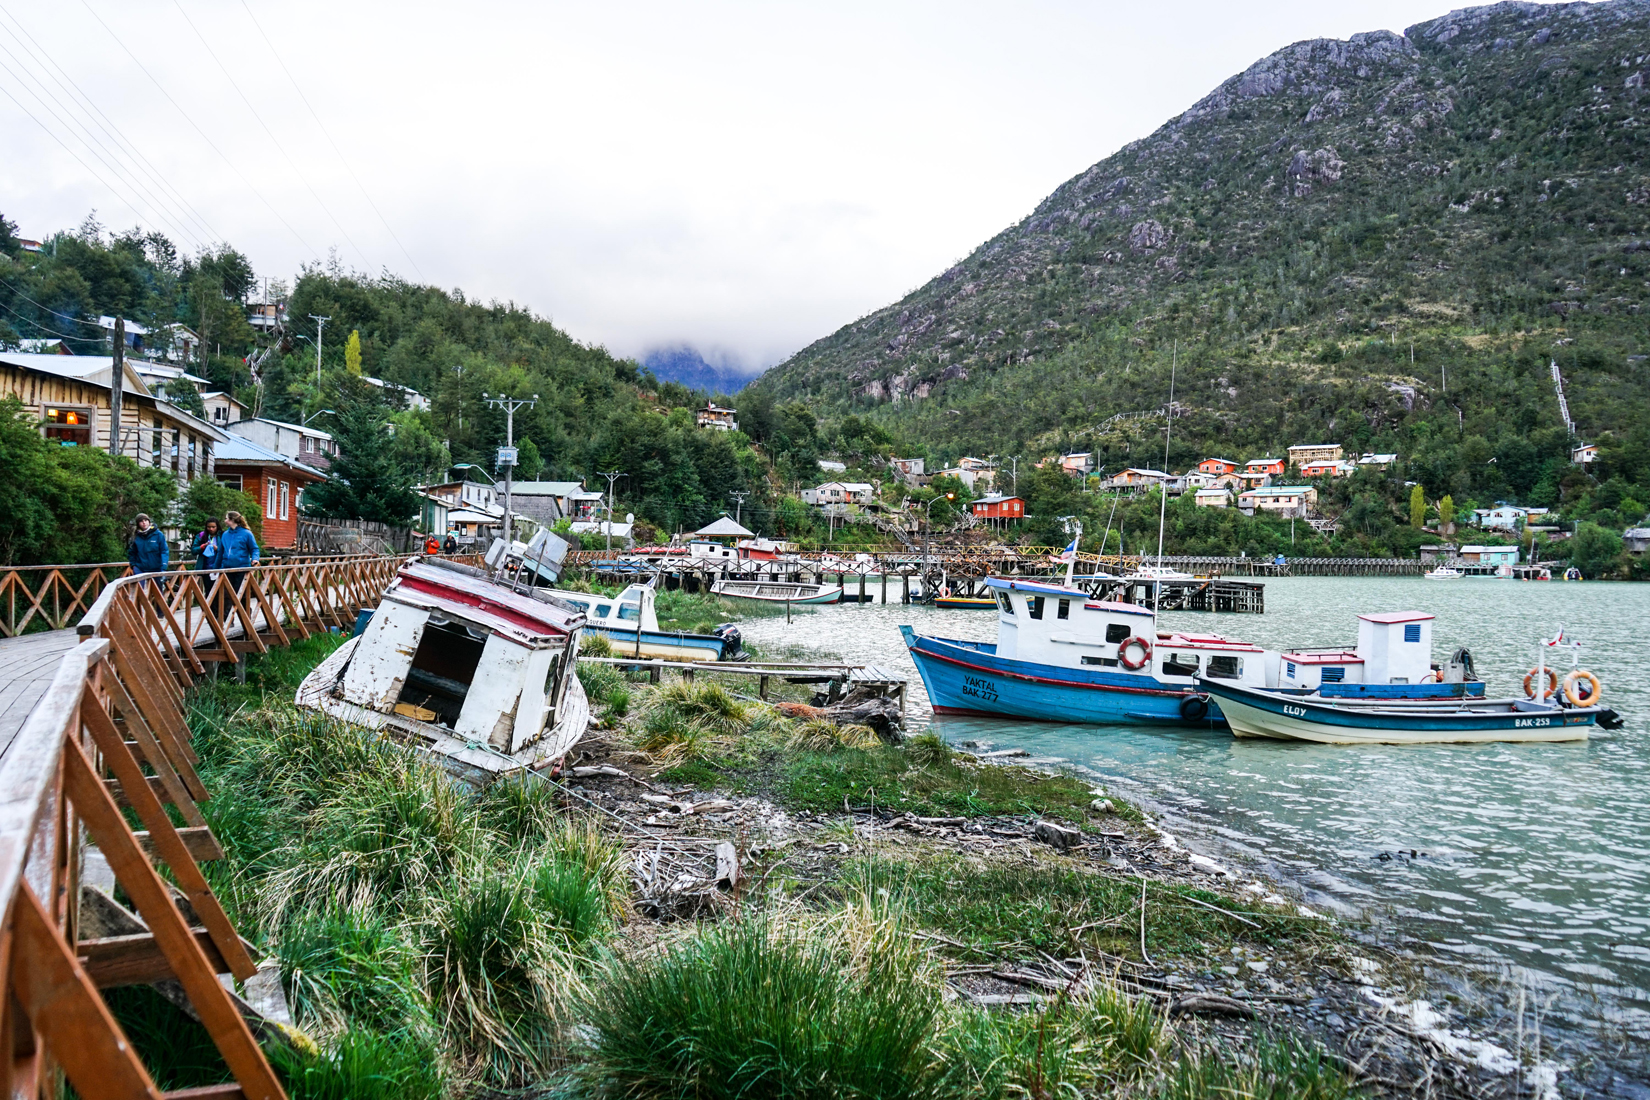 Patagonia's diverse coastline offers NOLS sea kayaking expedition travelers the experiential opportunity to explore the culture of local fishing villages (photo by Oscar Manguy/NOLS).